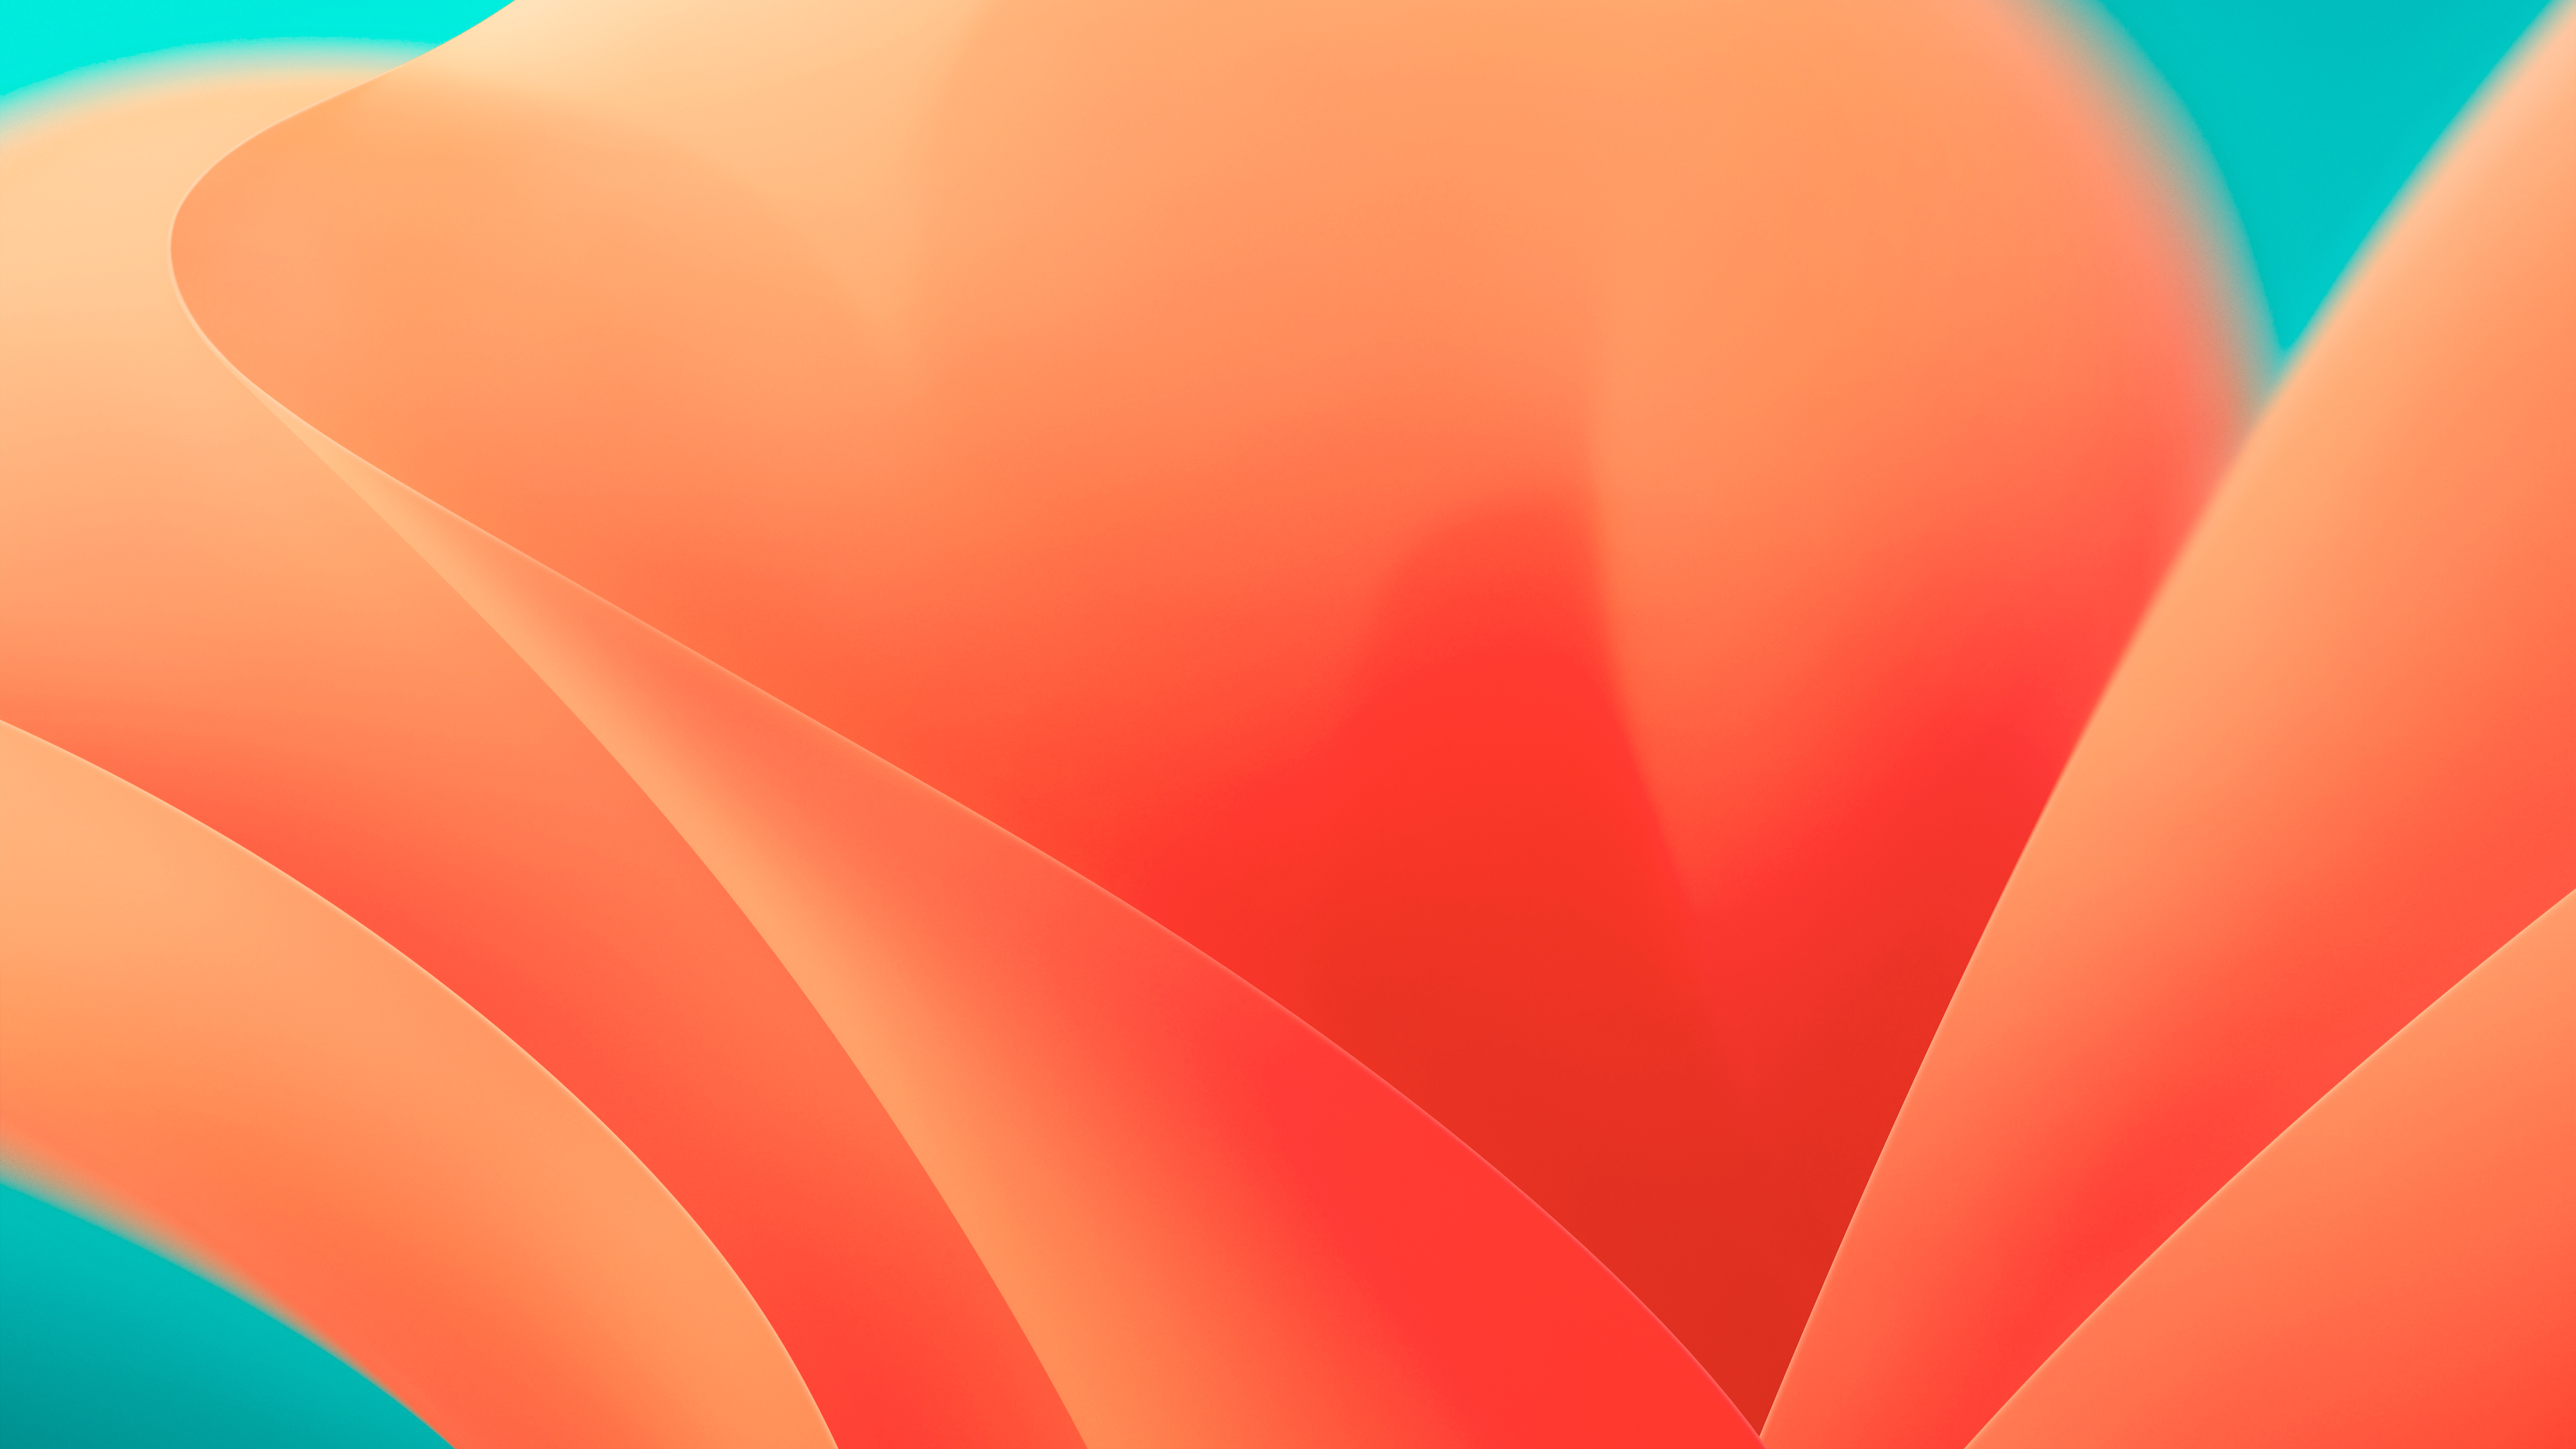 7680x4320 Mac Os Ventura Orange 8k 8k HD 4k Wallpapers, Images, Backgrounds,  Photos and Pictures